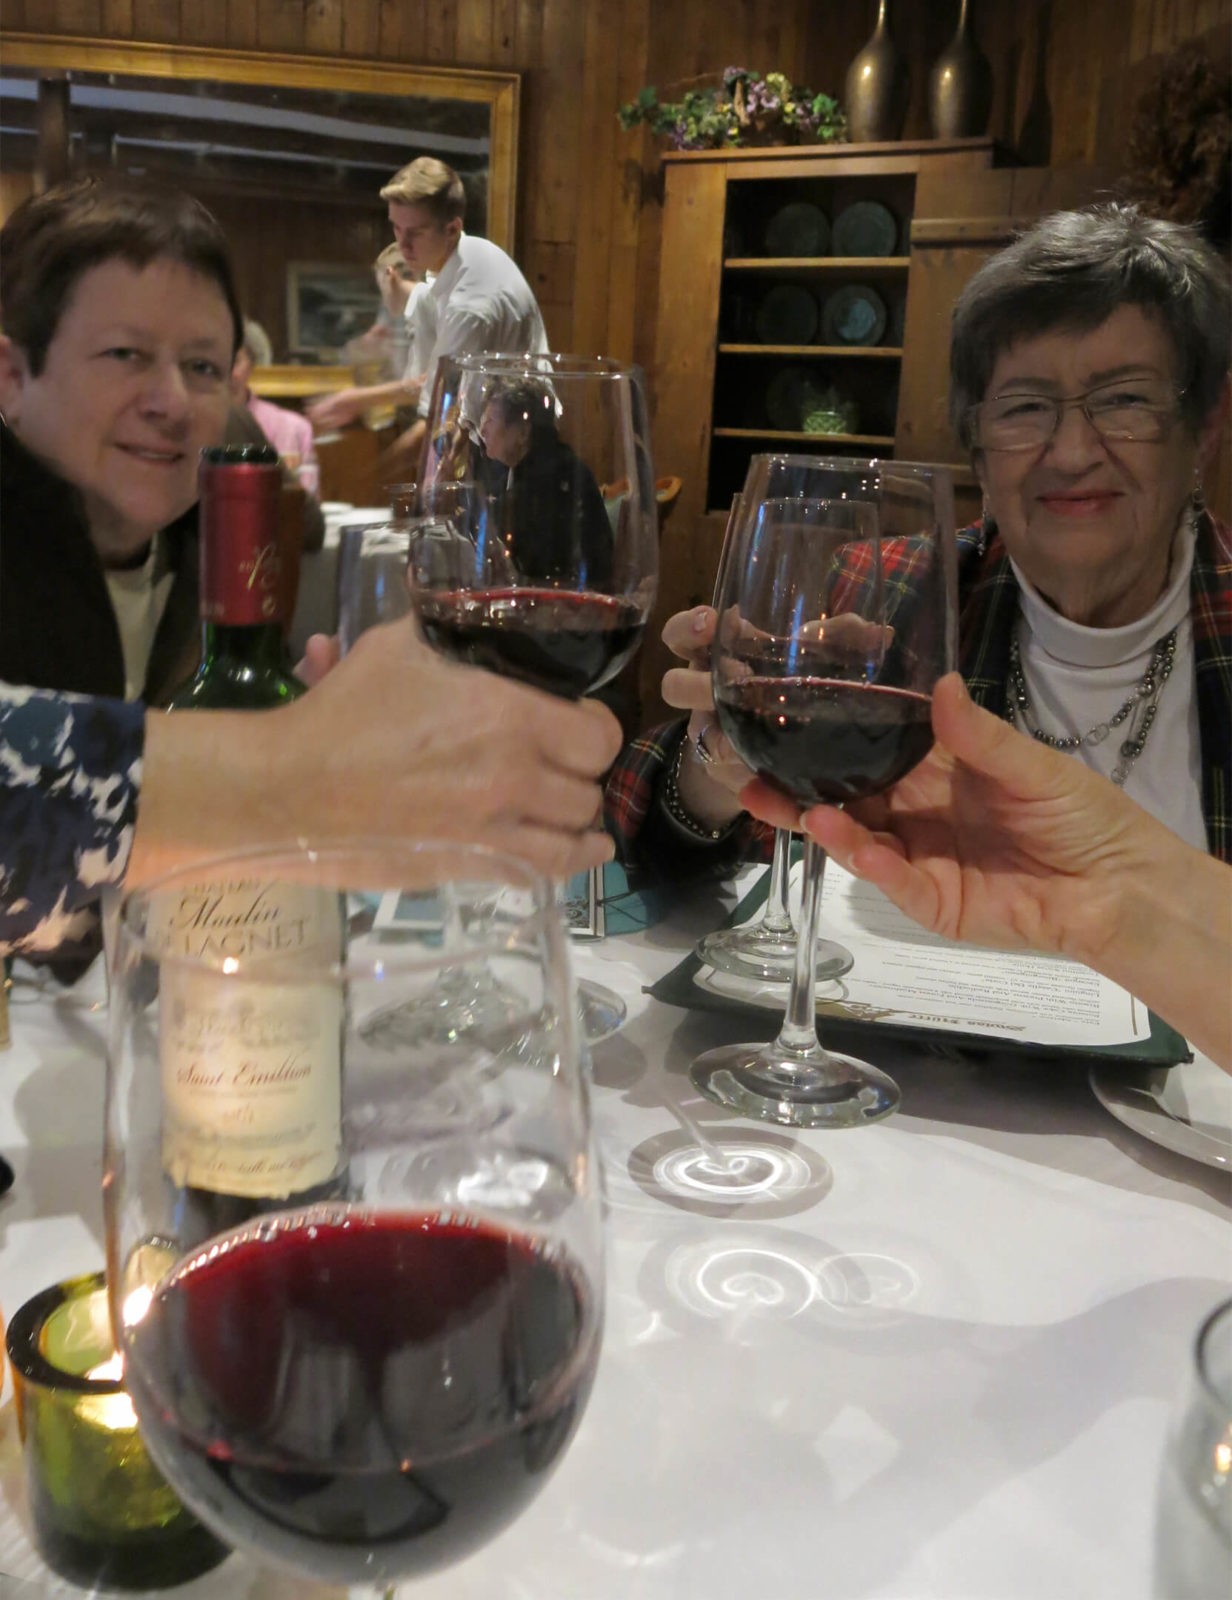 Robin Botie of ithaca, New York, makes rituals and toasts with sisters on their mother's 90th birthday.